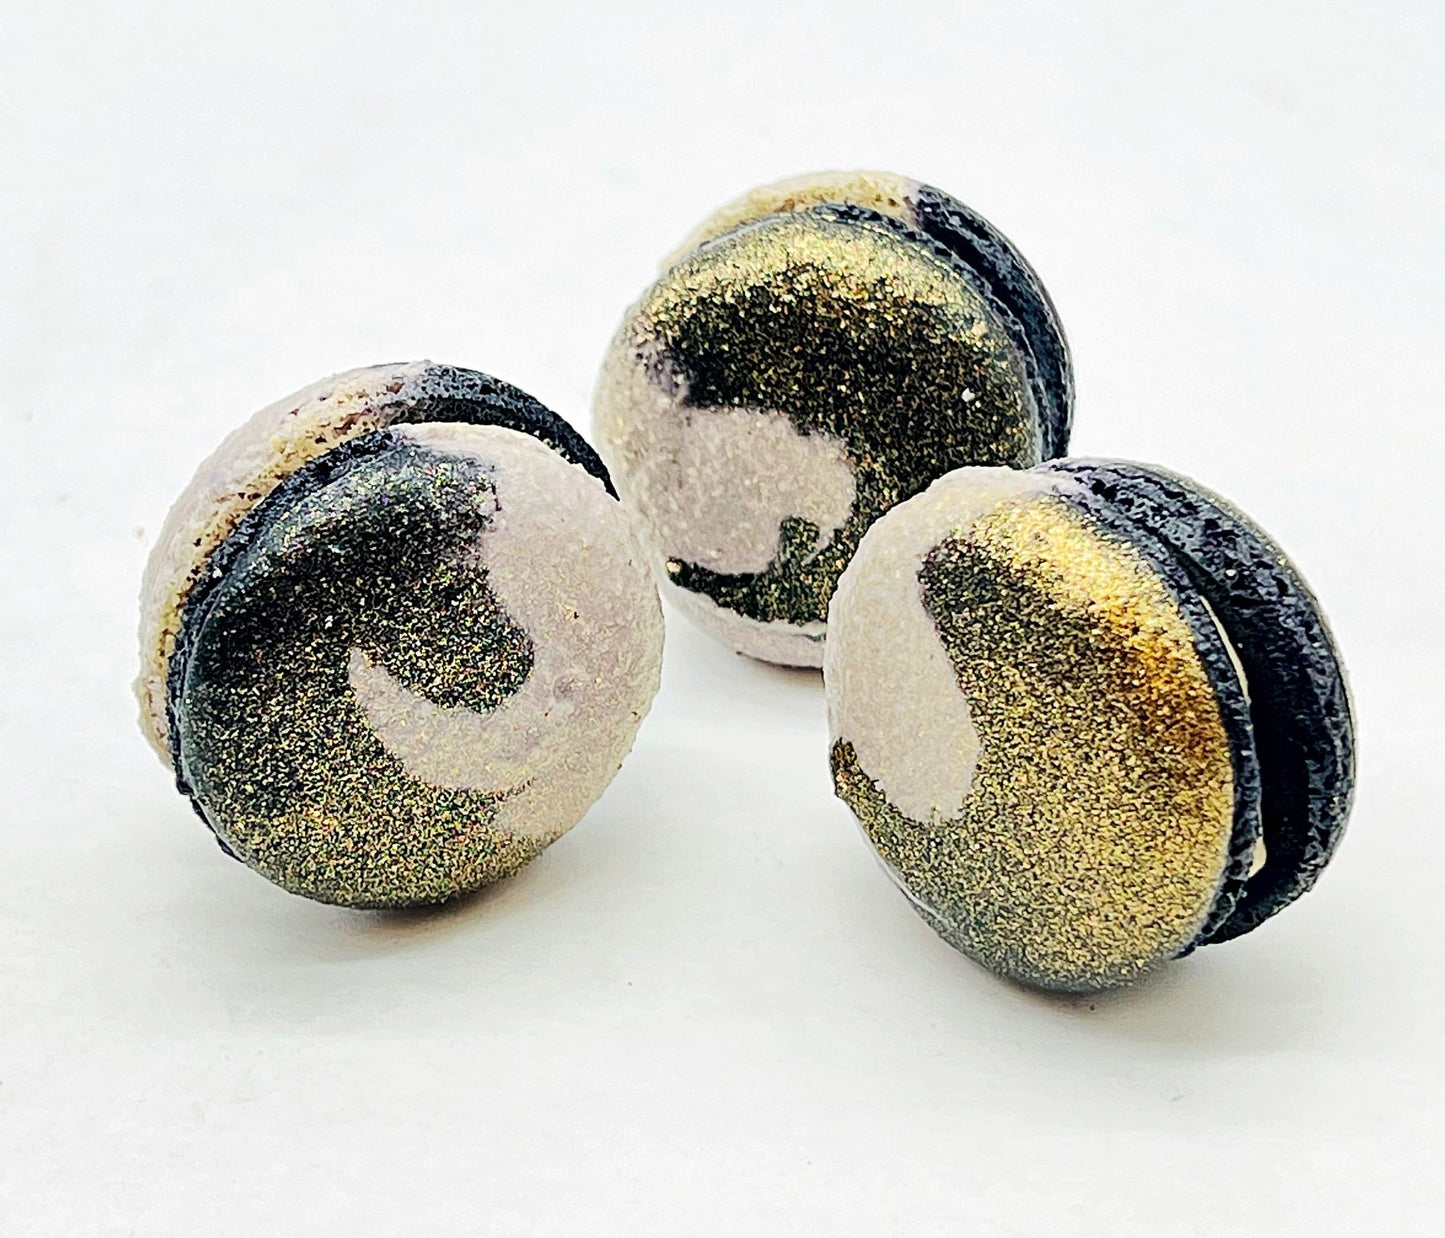 Space Edition Mac | The Moon French Macaron (Root Beer Flavor) | Available in 6, 12 & 24 - Macaron Centrale6 Pack